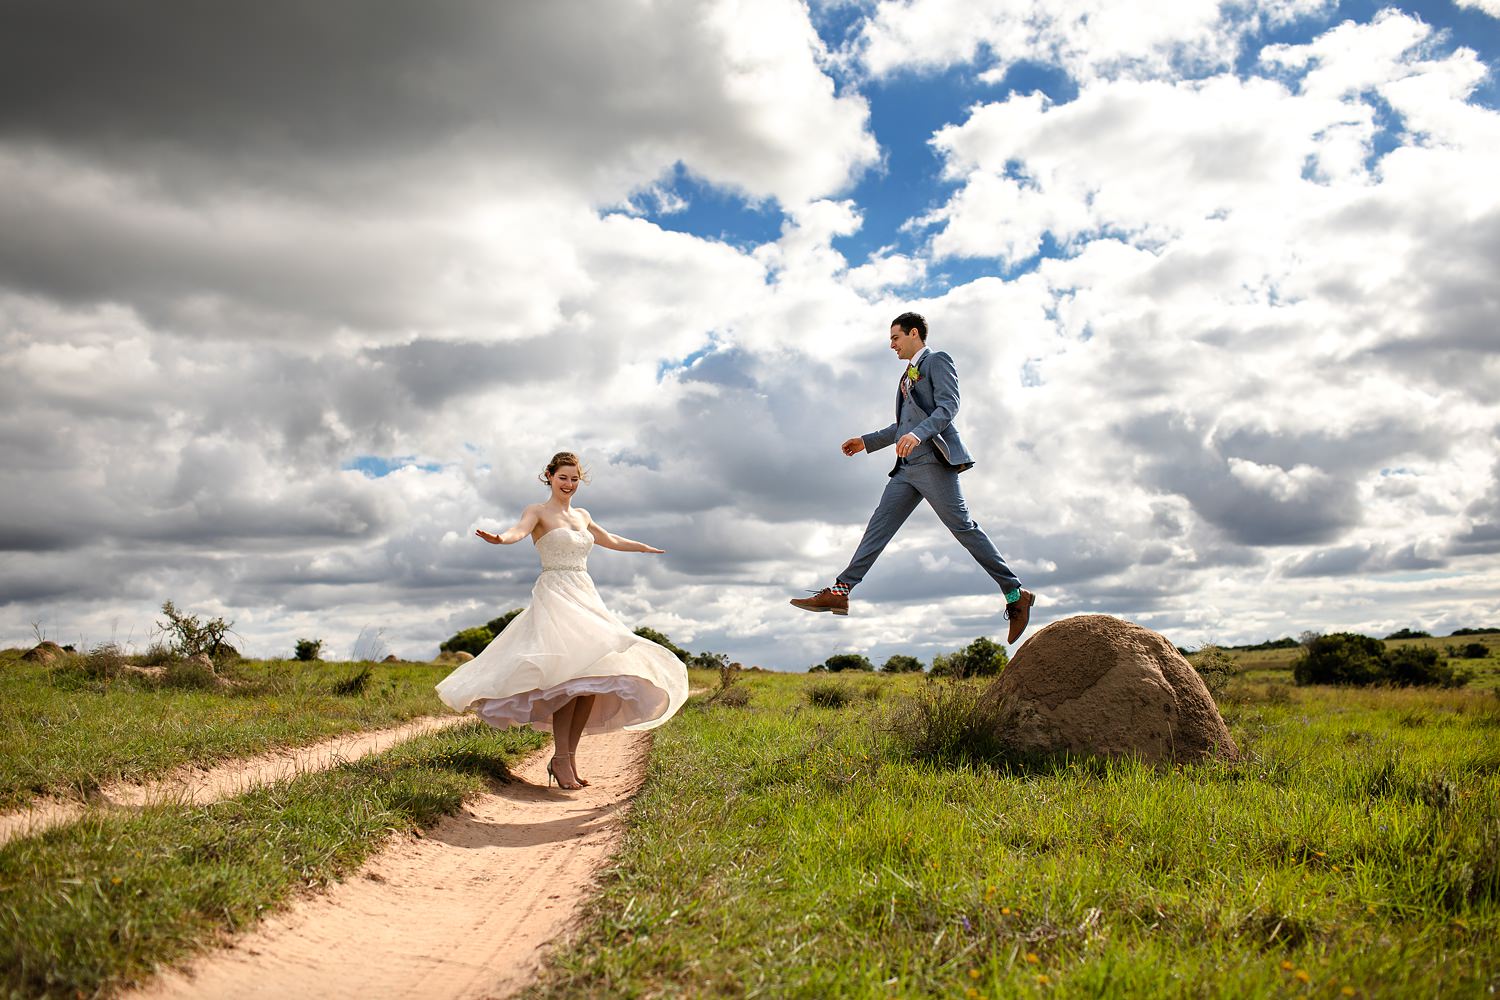 Creative and happy safari wedding photos for a couple during by wedding photographer in South Africa as the groom jumps off of a termite mound and the bride spins in her mid length wedding dress.